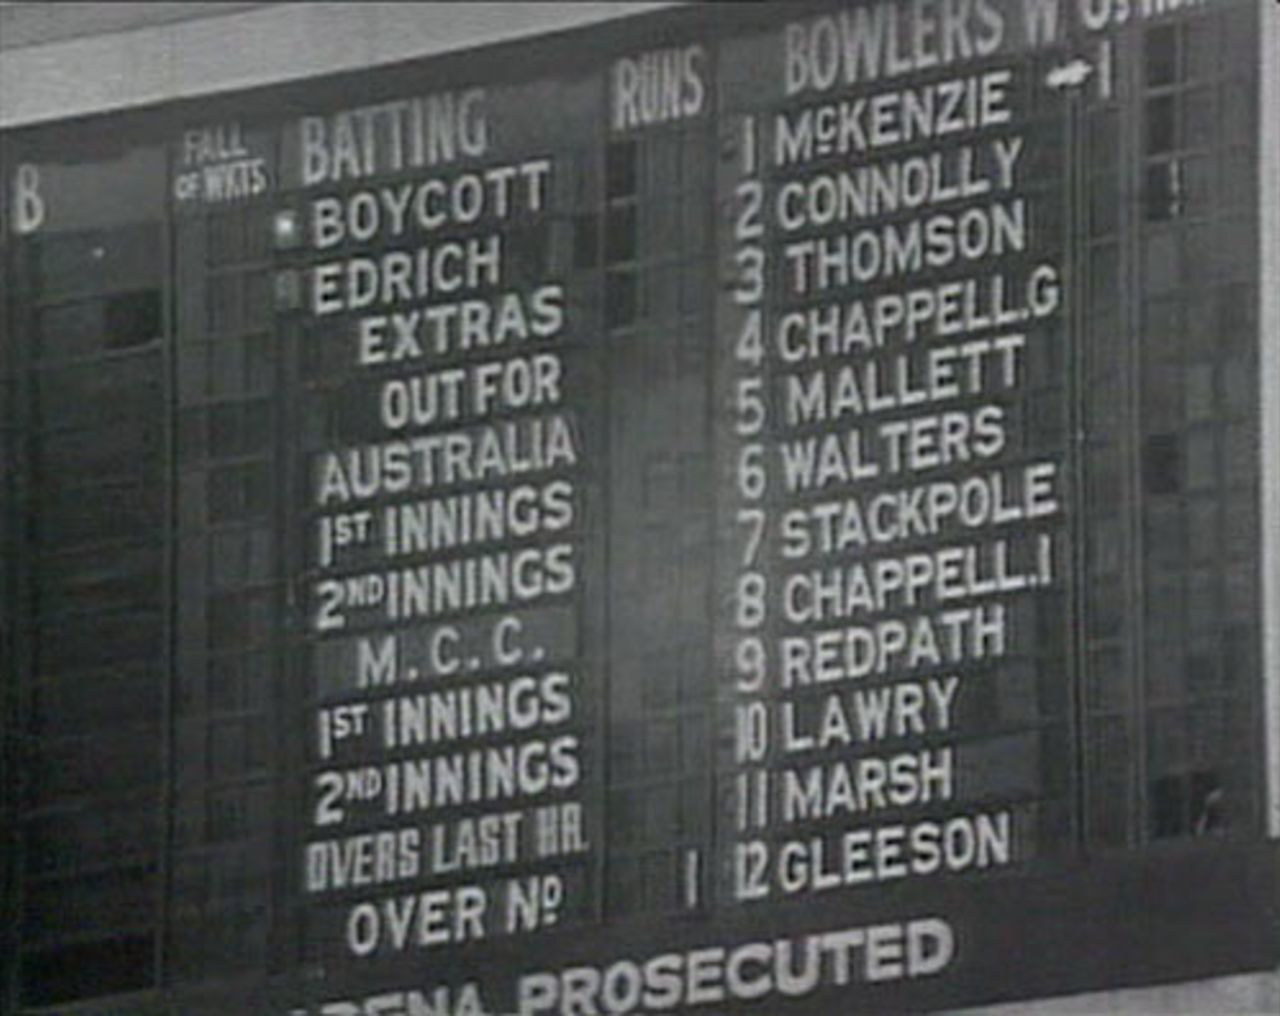 The scoreboard at the start of the first-ever one-day international, Australia v England, Melbourne, January 5, 1971